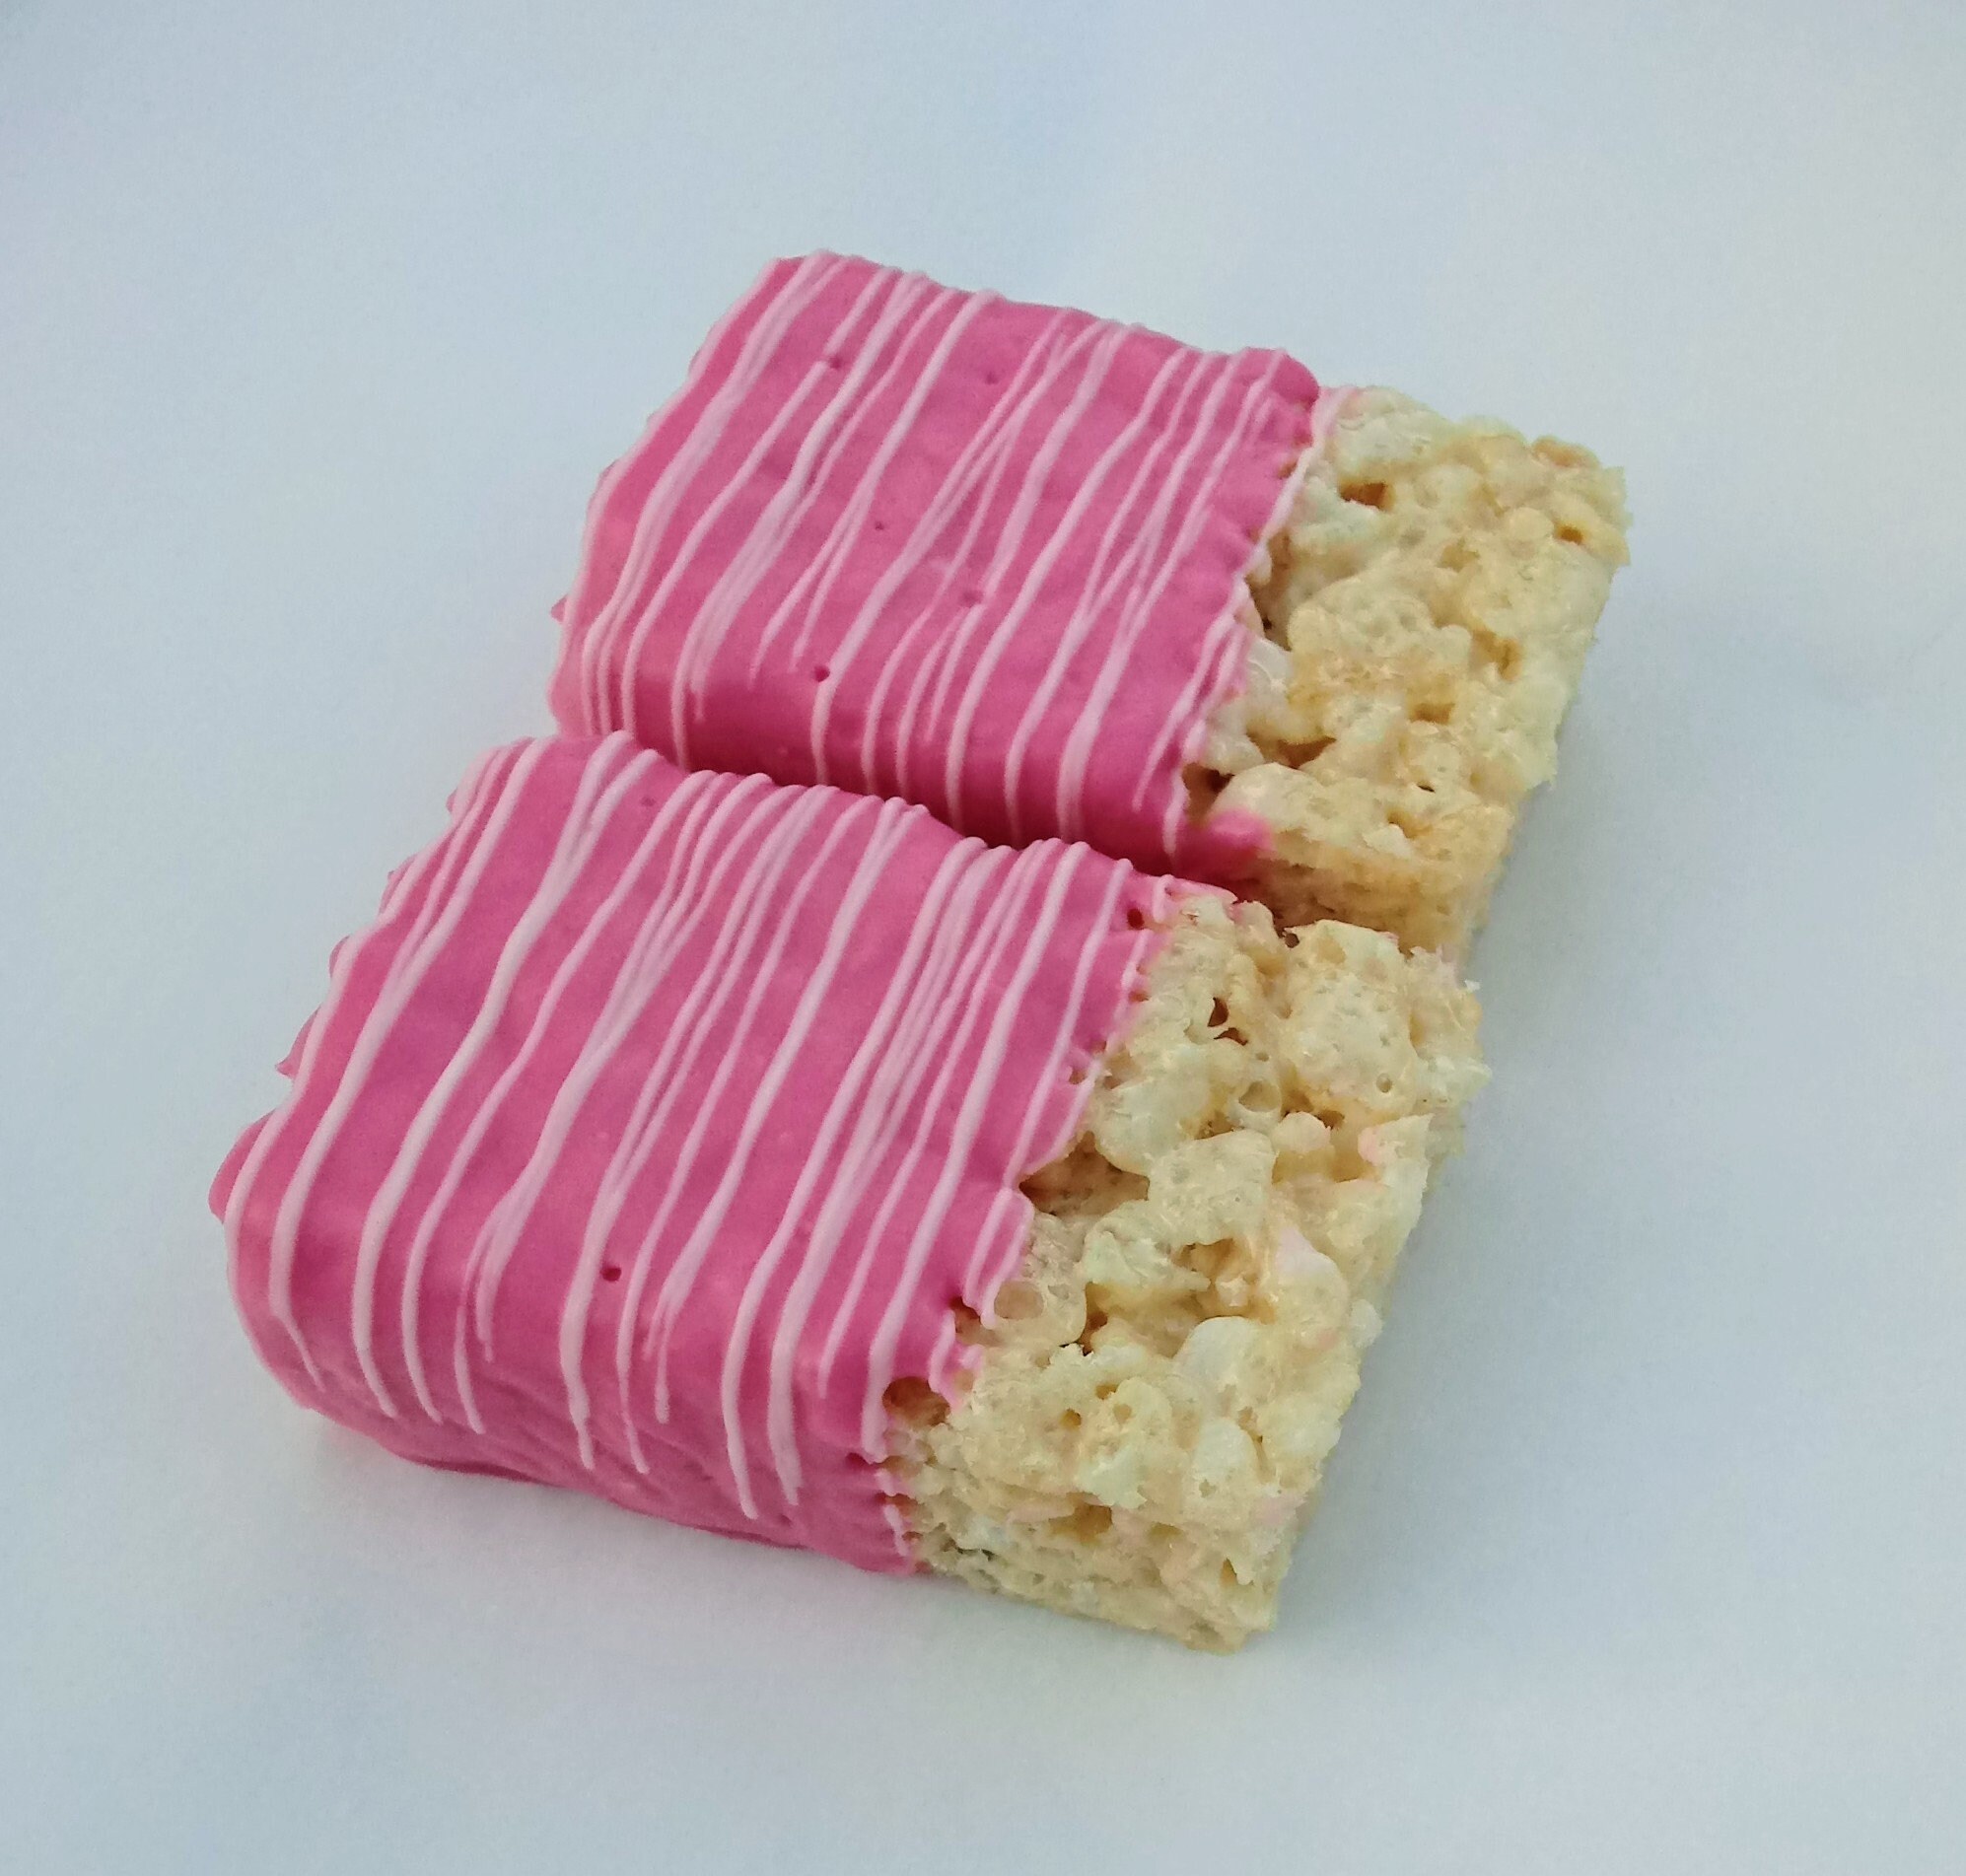 Zebra themed chocolate dipped Rice Krispies Treats with hot pink